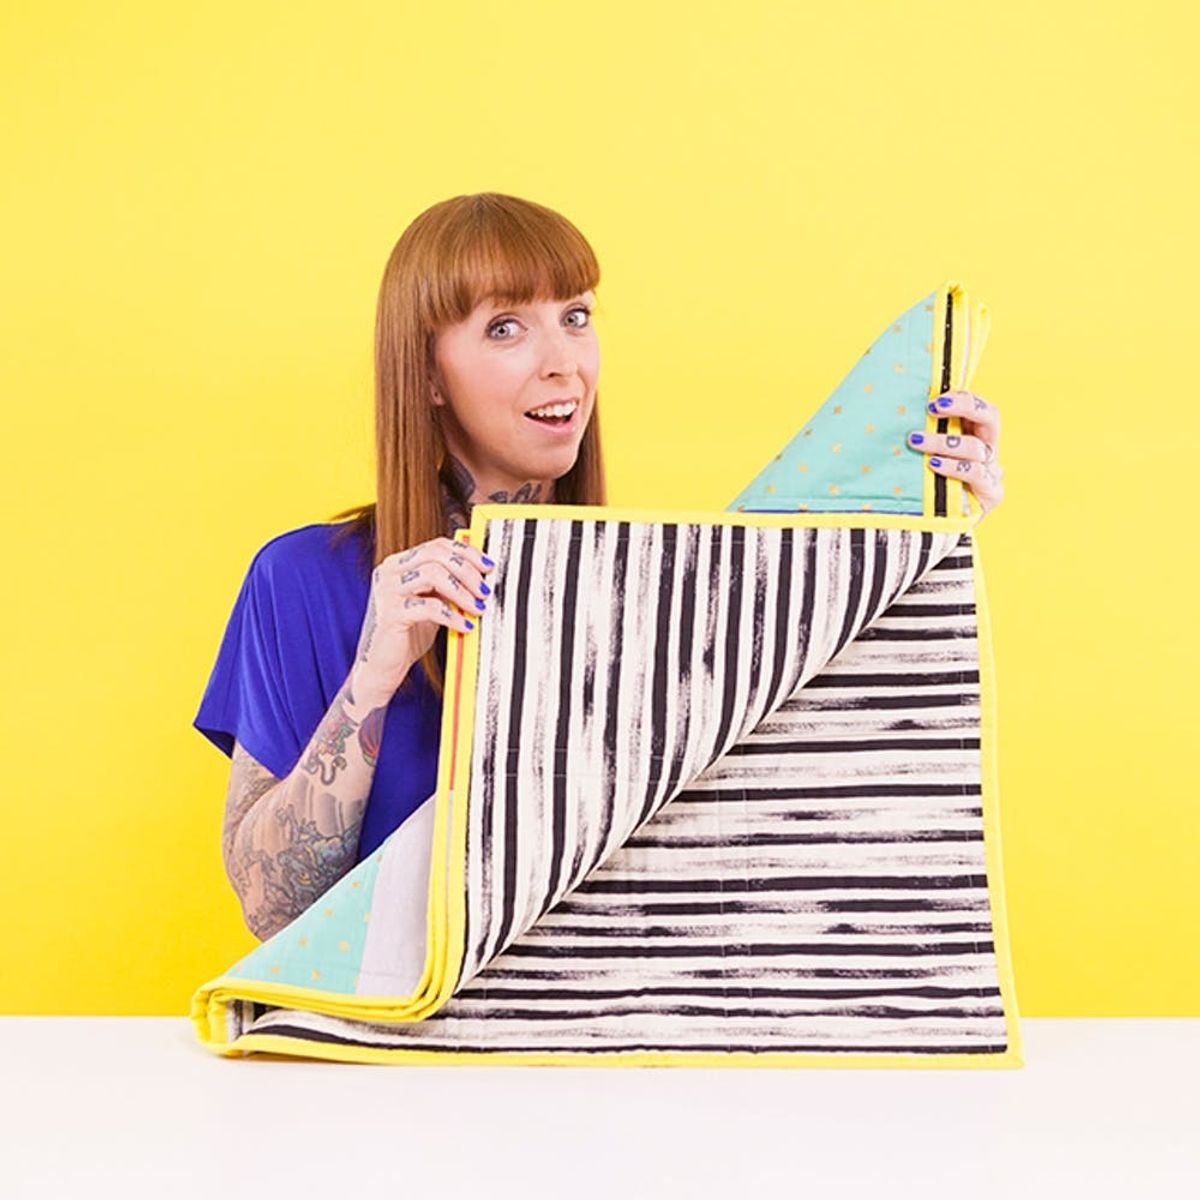 Meet the New Online Class Instructor, Who Is Making Quilting SO Cool